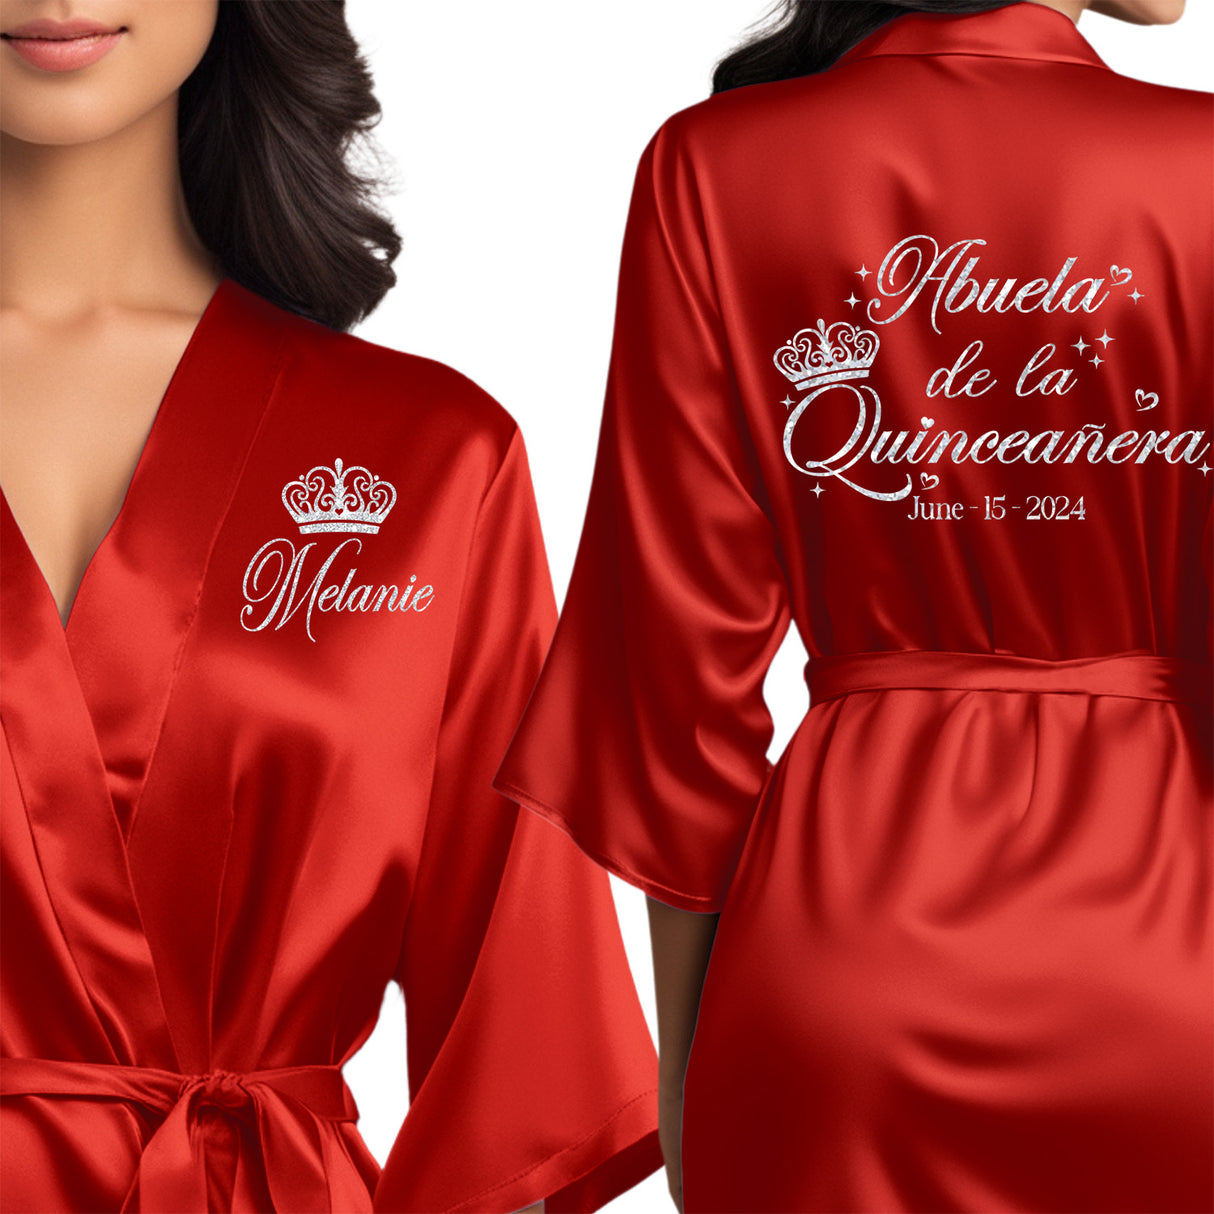 Front and back personalized satin quinceanera robes at knee length. Abuela de la quinceanera getting ready robes.